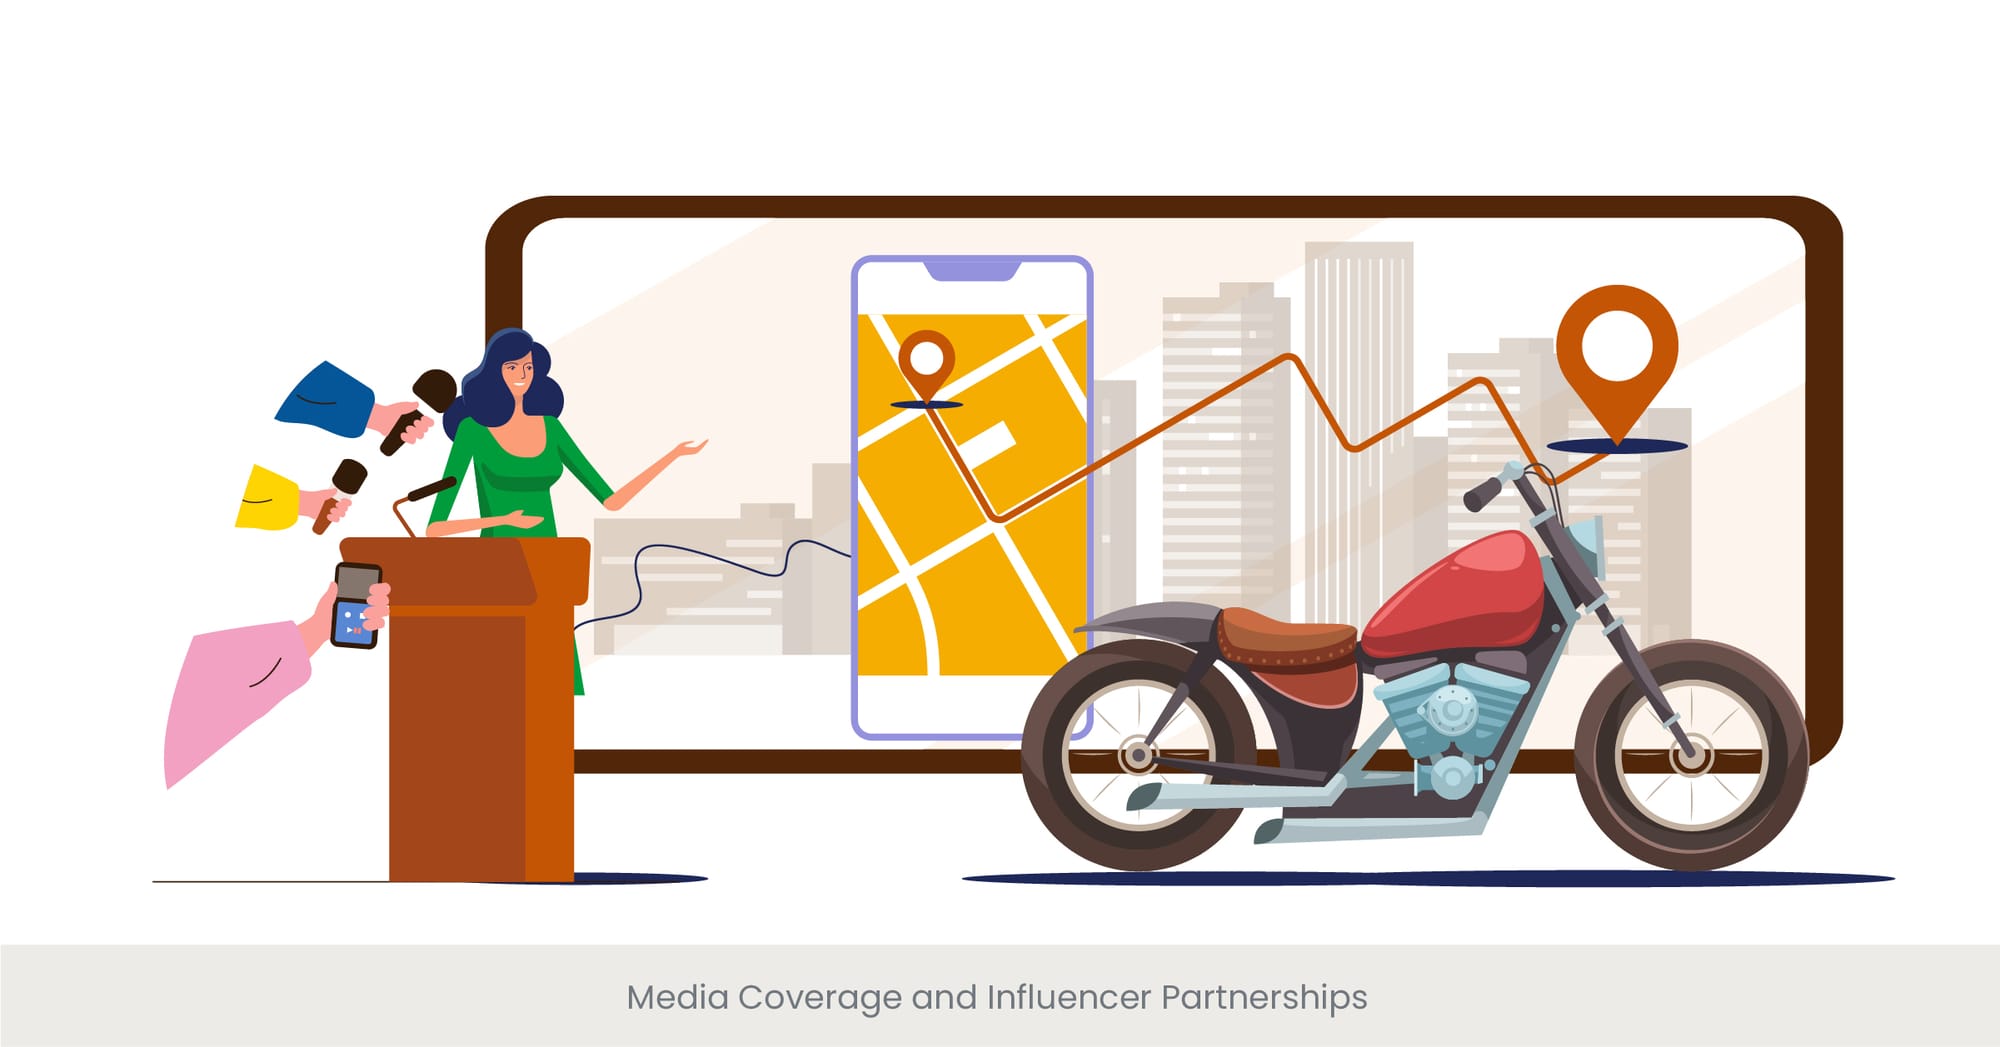 Media Coverage and Influencer Partnerships